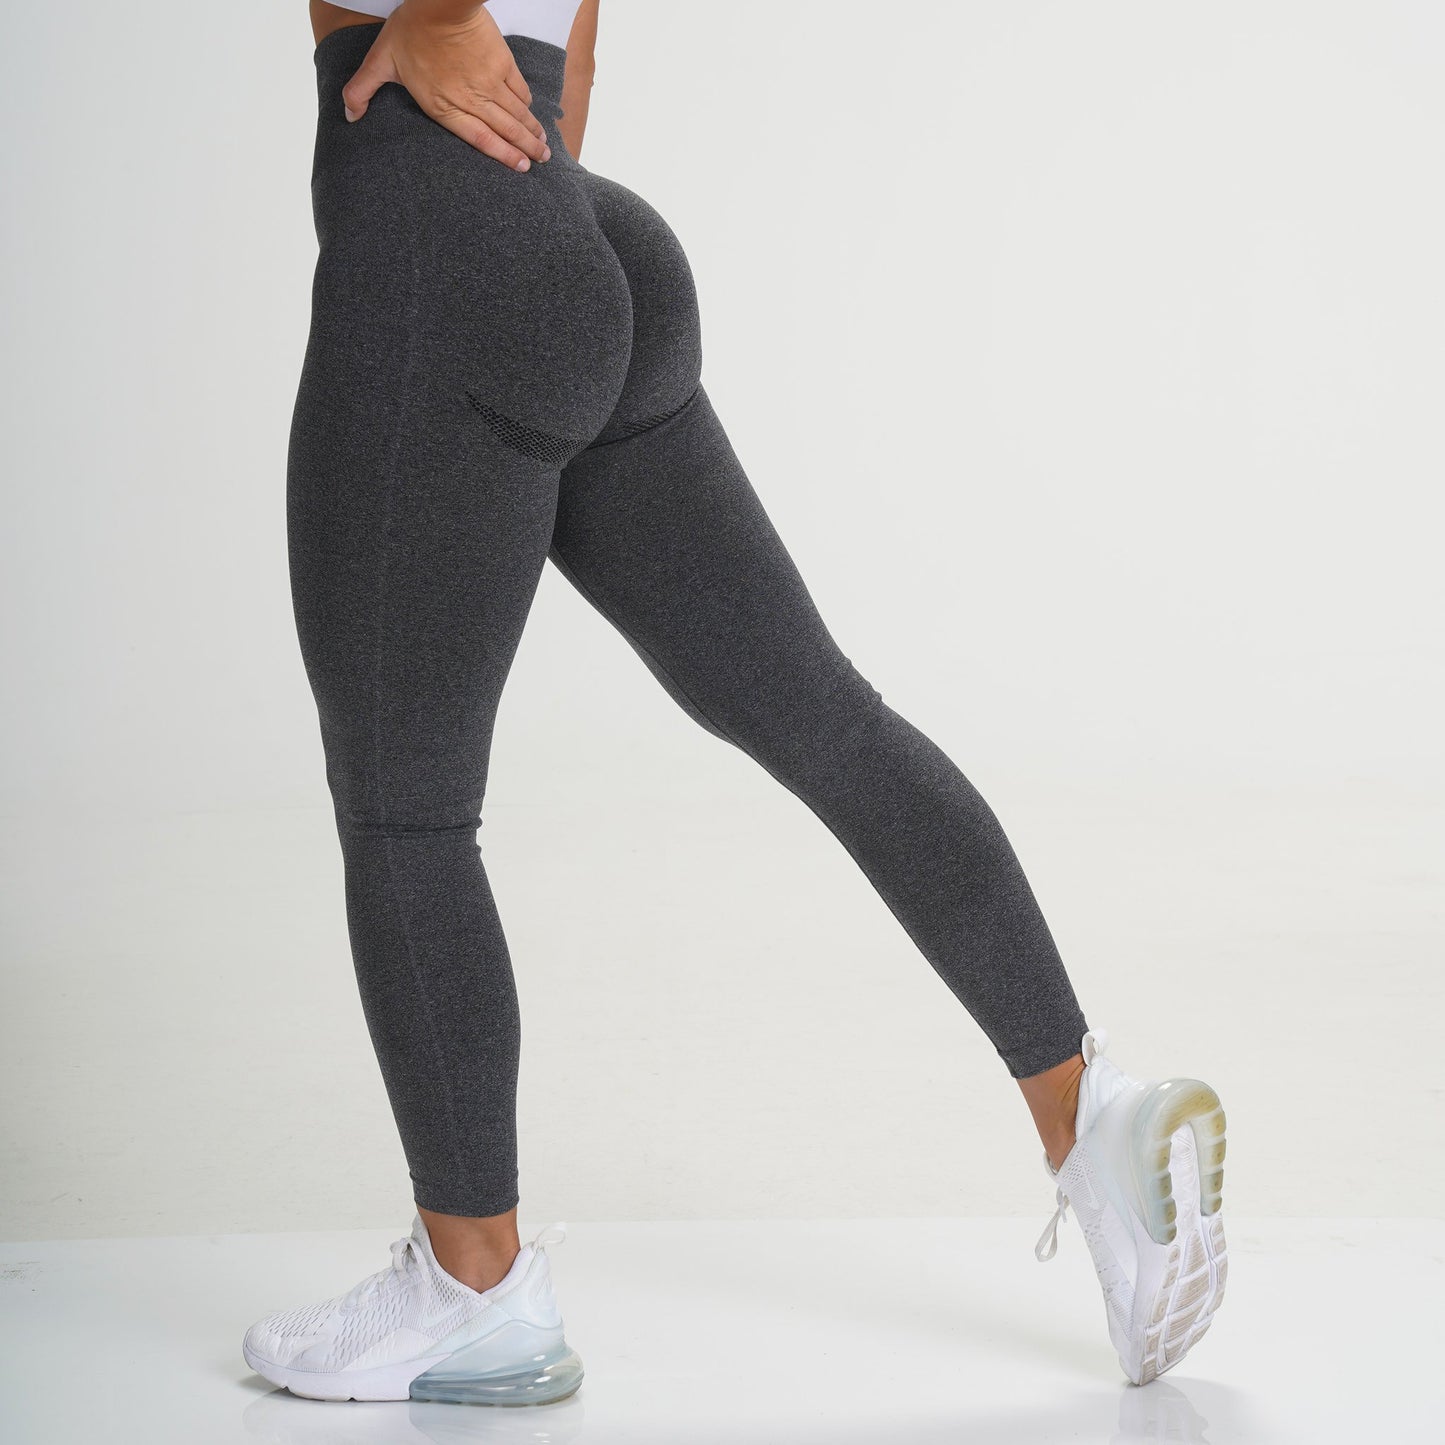 Knitted buttocks moisture wicking yoga pants